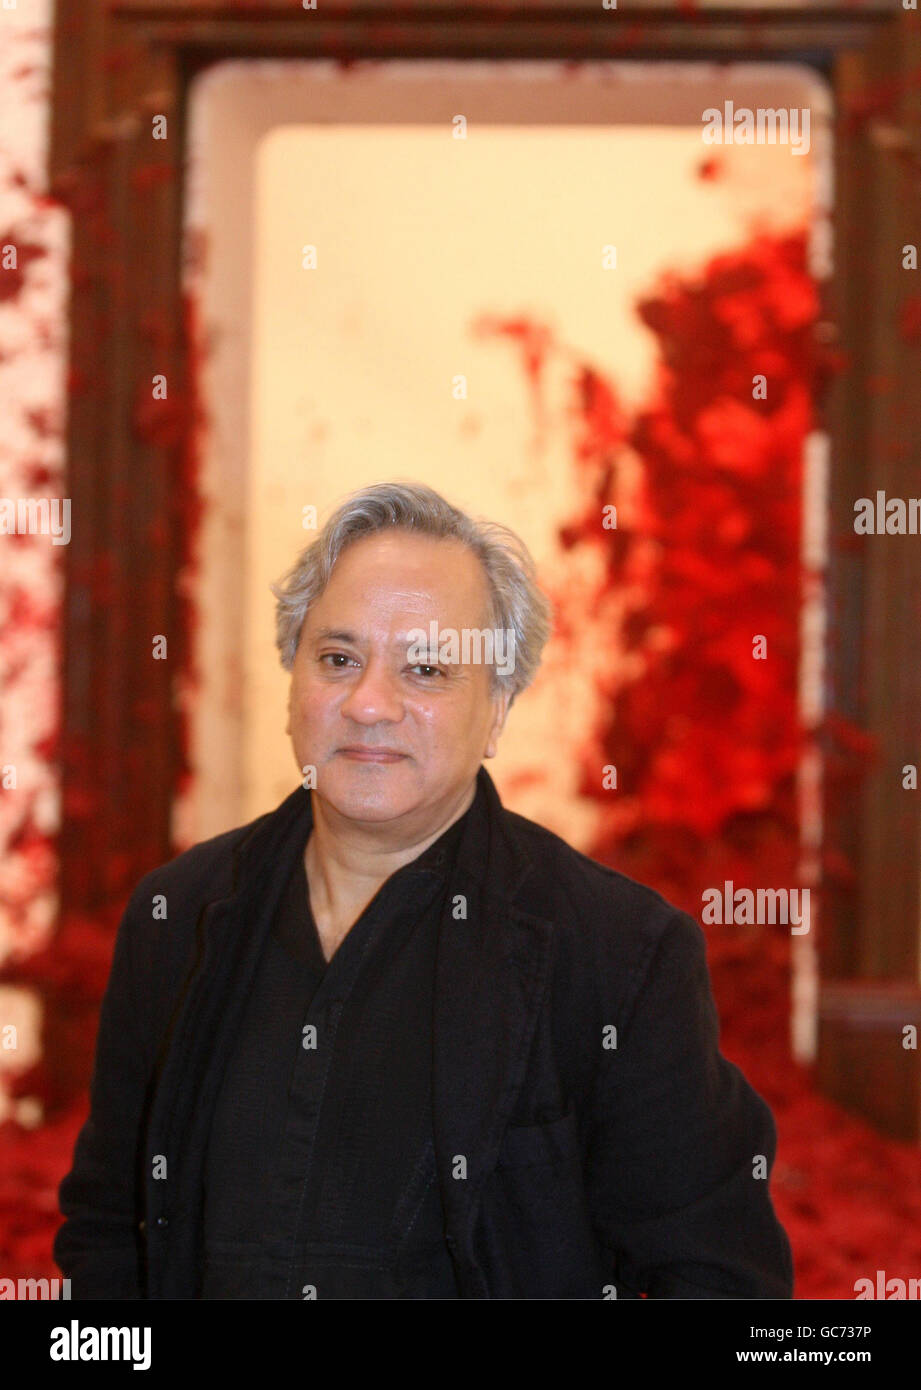 Photo call with Anish Kapoor and his major work, Shooting into the Corner, which has fired red wax at the Royal Academy's walls every twenty minutes during his solo exhibition since September 26th. The exhibition will run midnight on Friday December 11th at the Royal Academy of Arts, London. Stock Photo